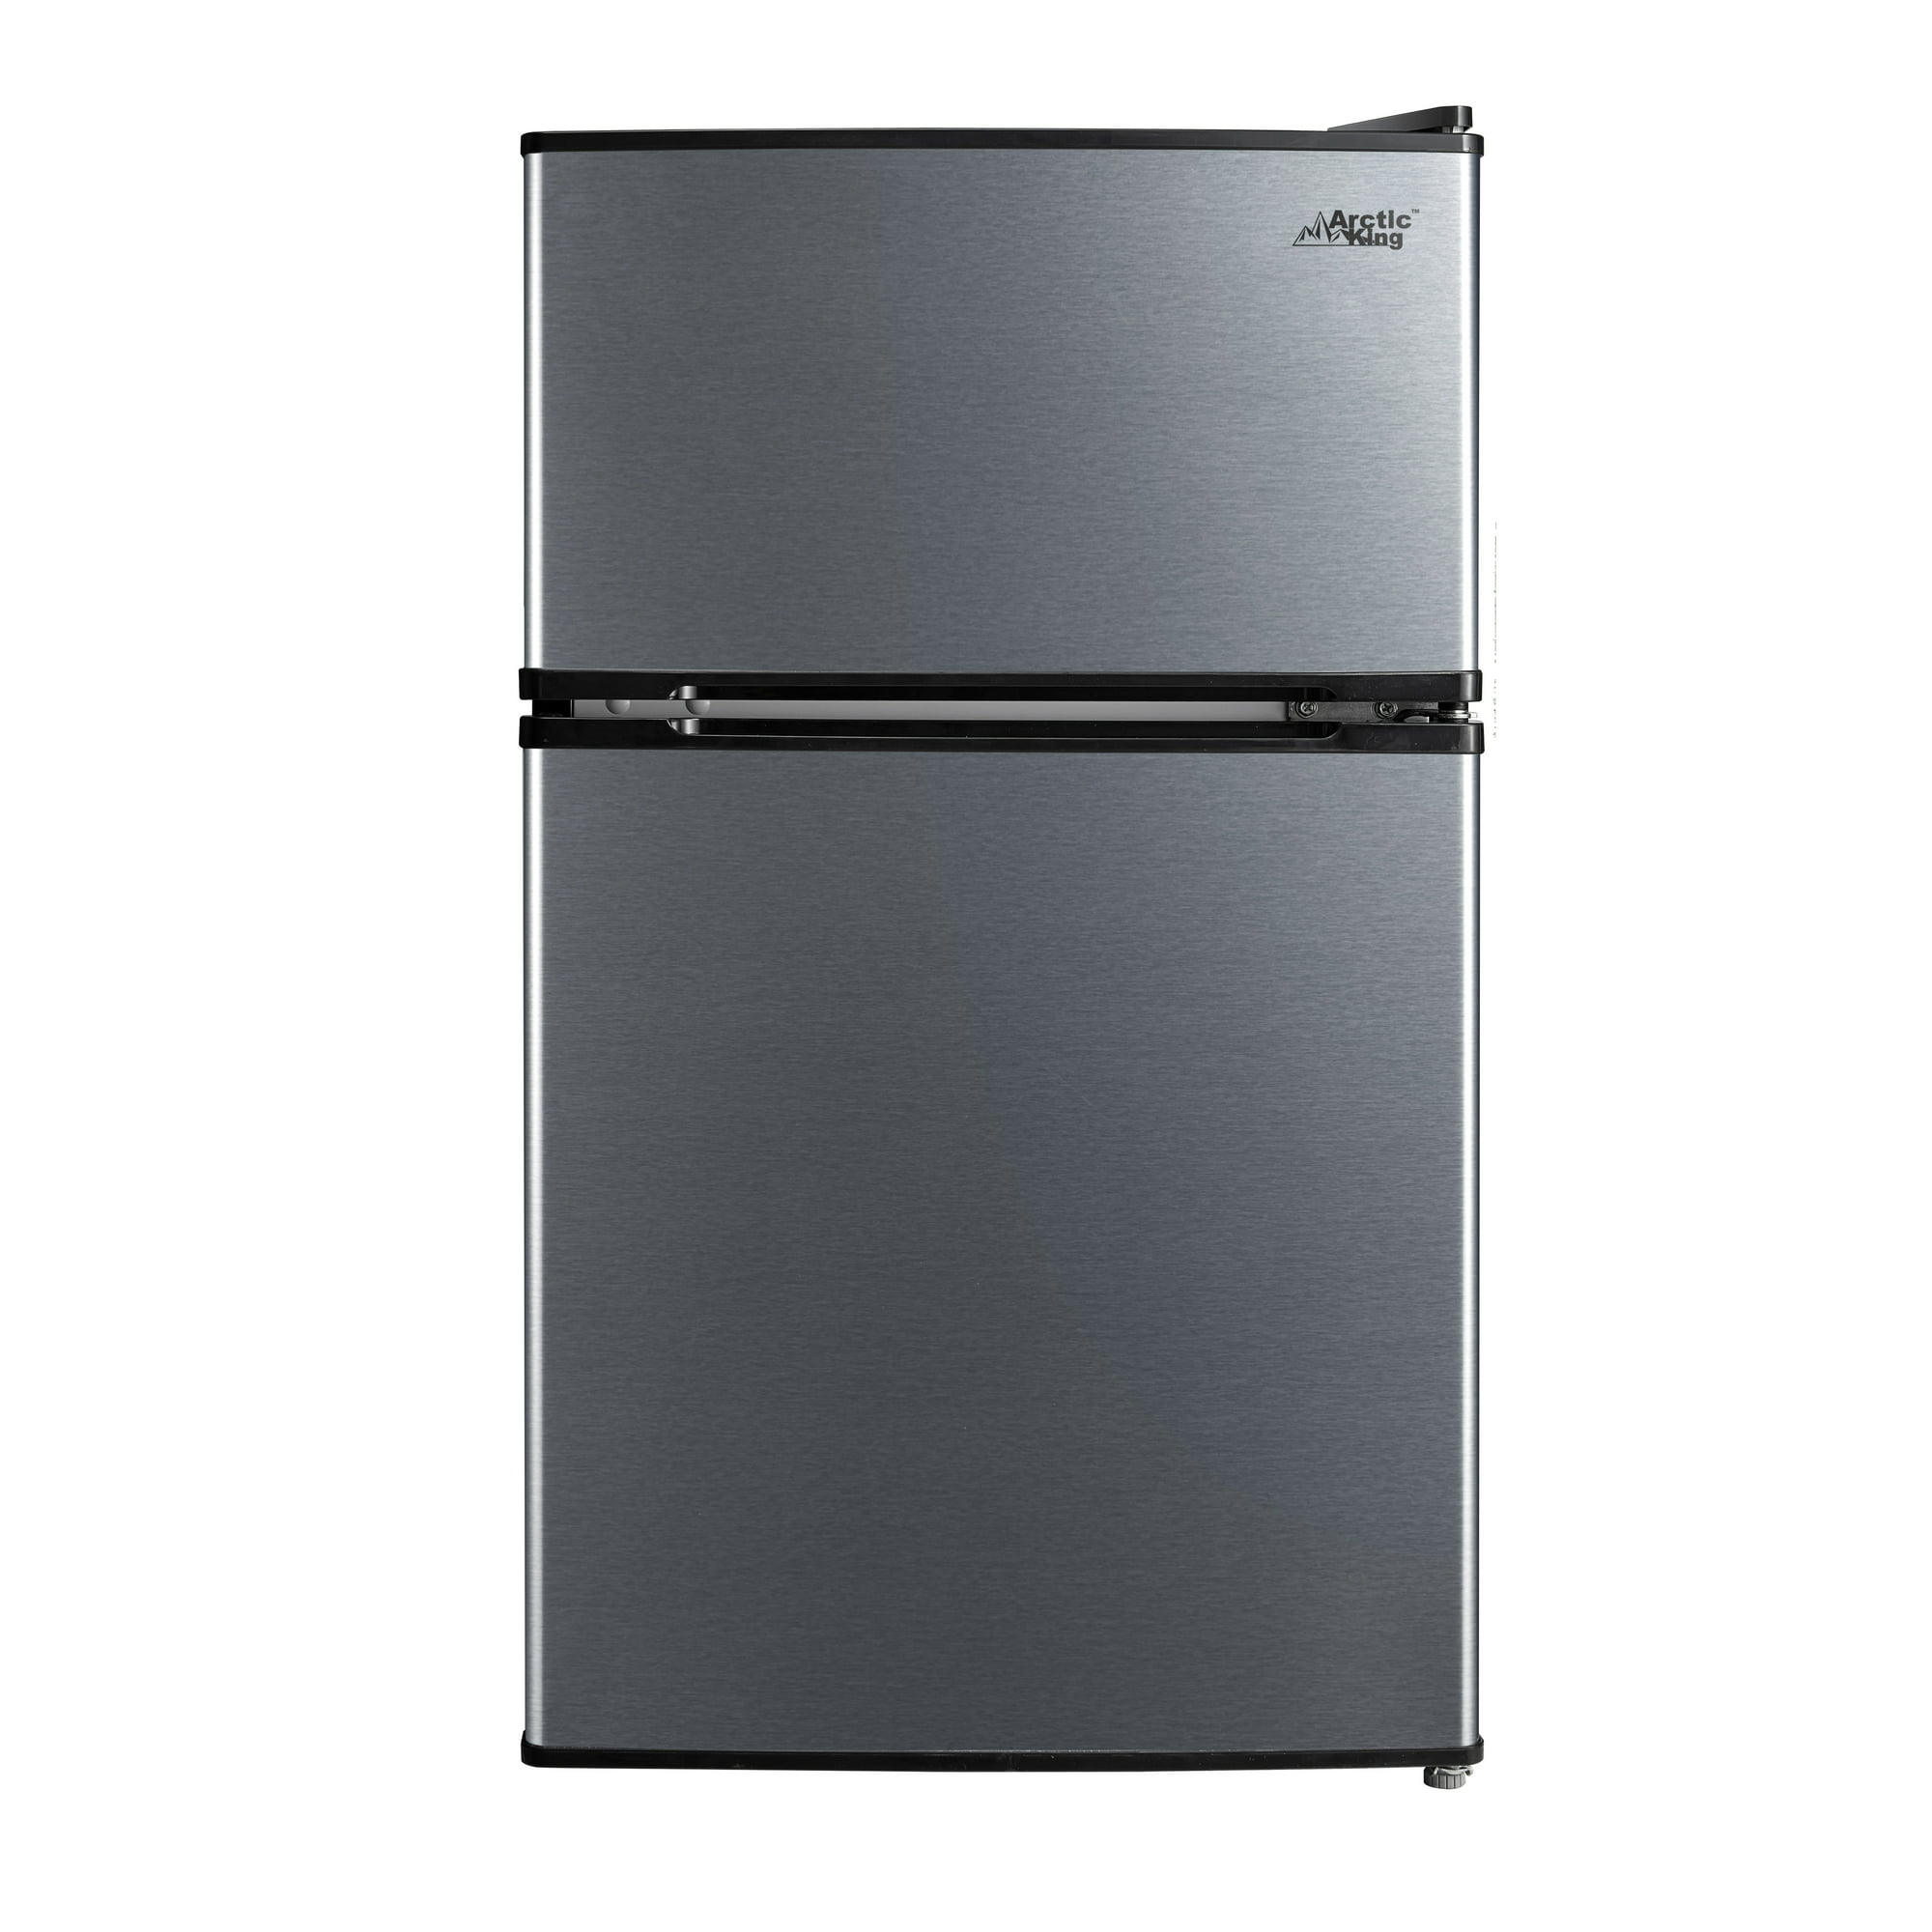 3.2-Cu Ft Arctic King Two Door Compact Refrigerator w/ Freezer (Stainless Steel, Black) $138 + Free Shipping